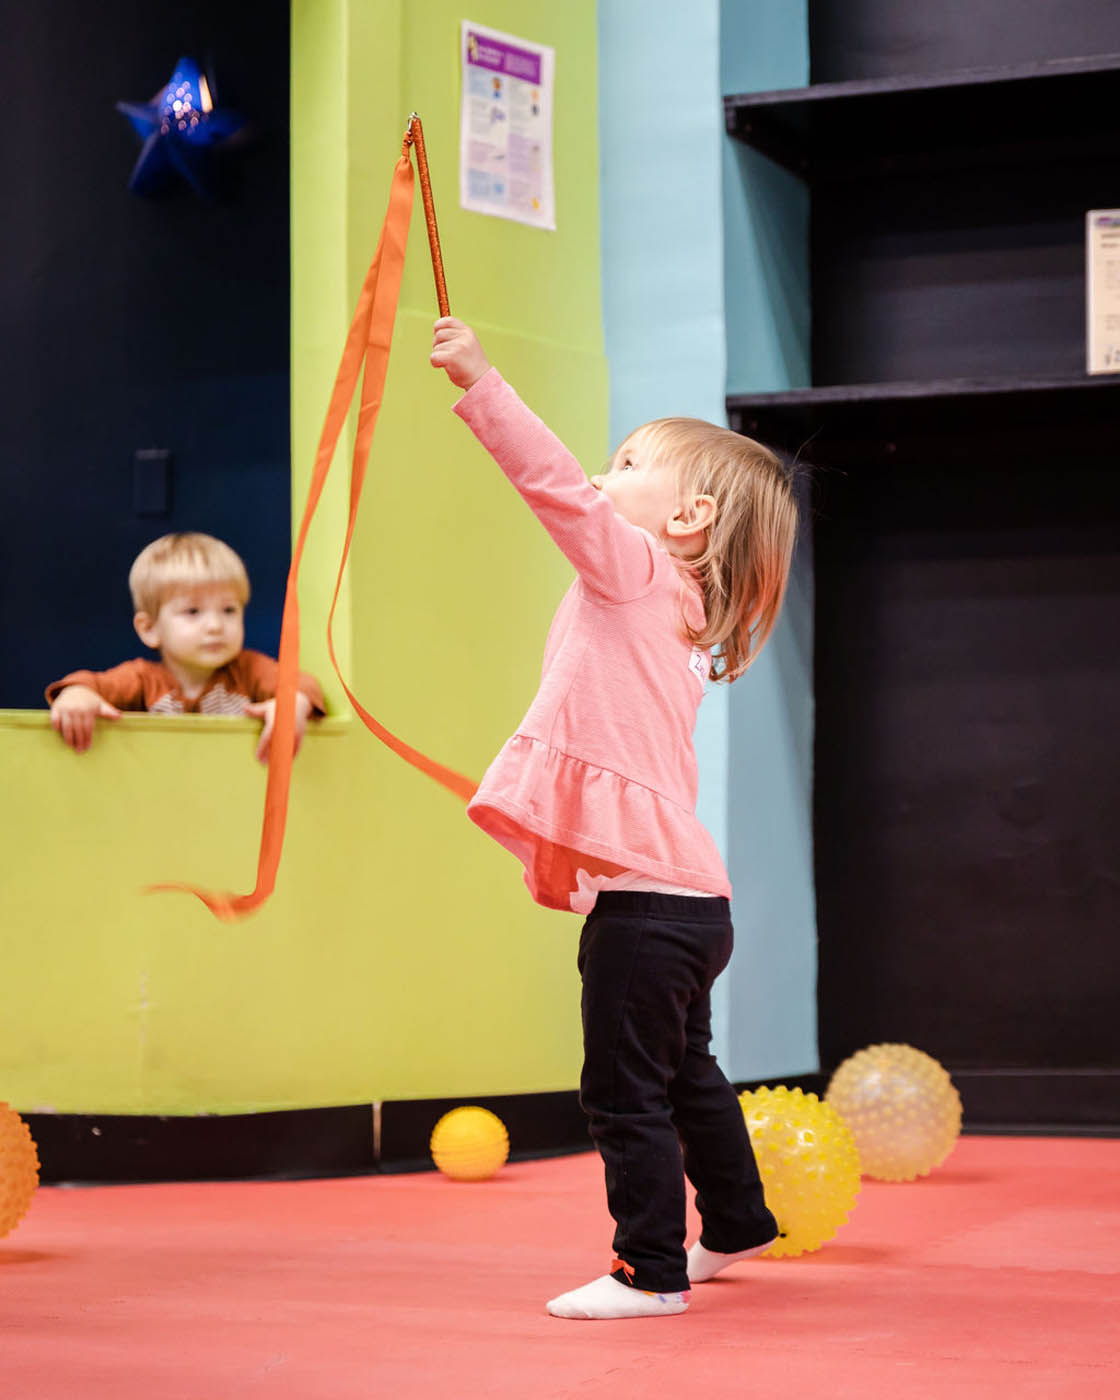 A little girl playing with ribbons and increasing her motor skills in sports classes with Romp n' Roll North Raleigh.